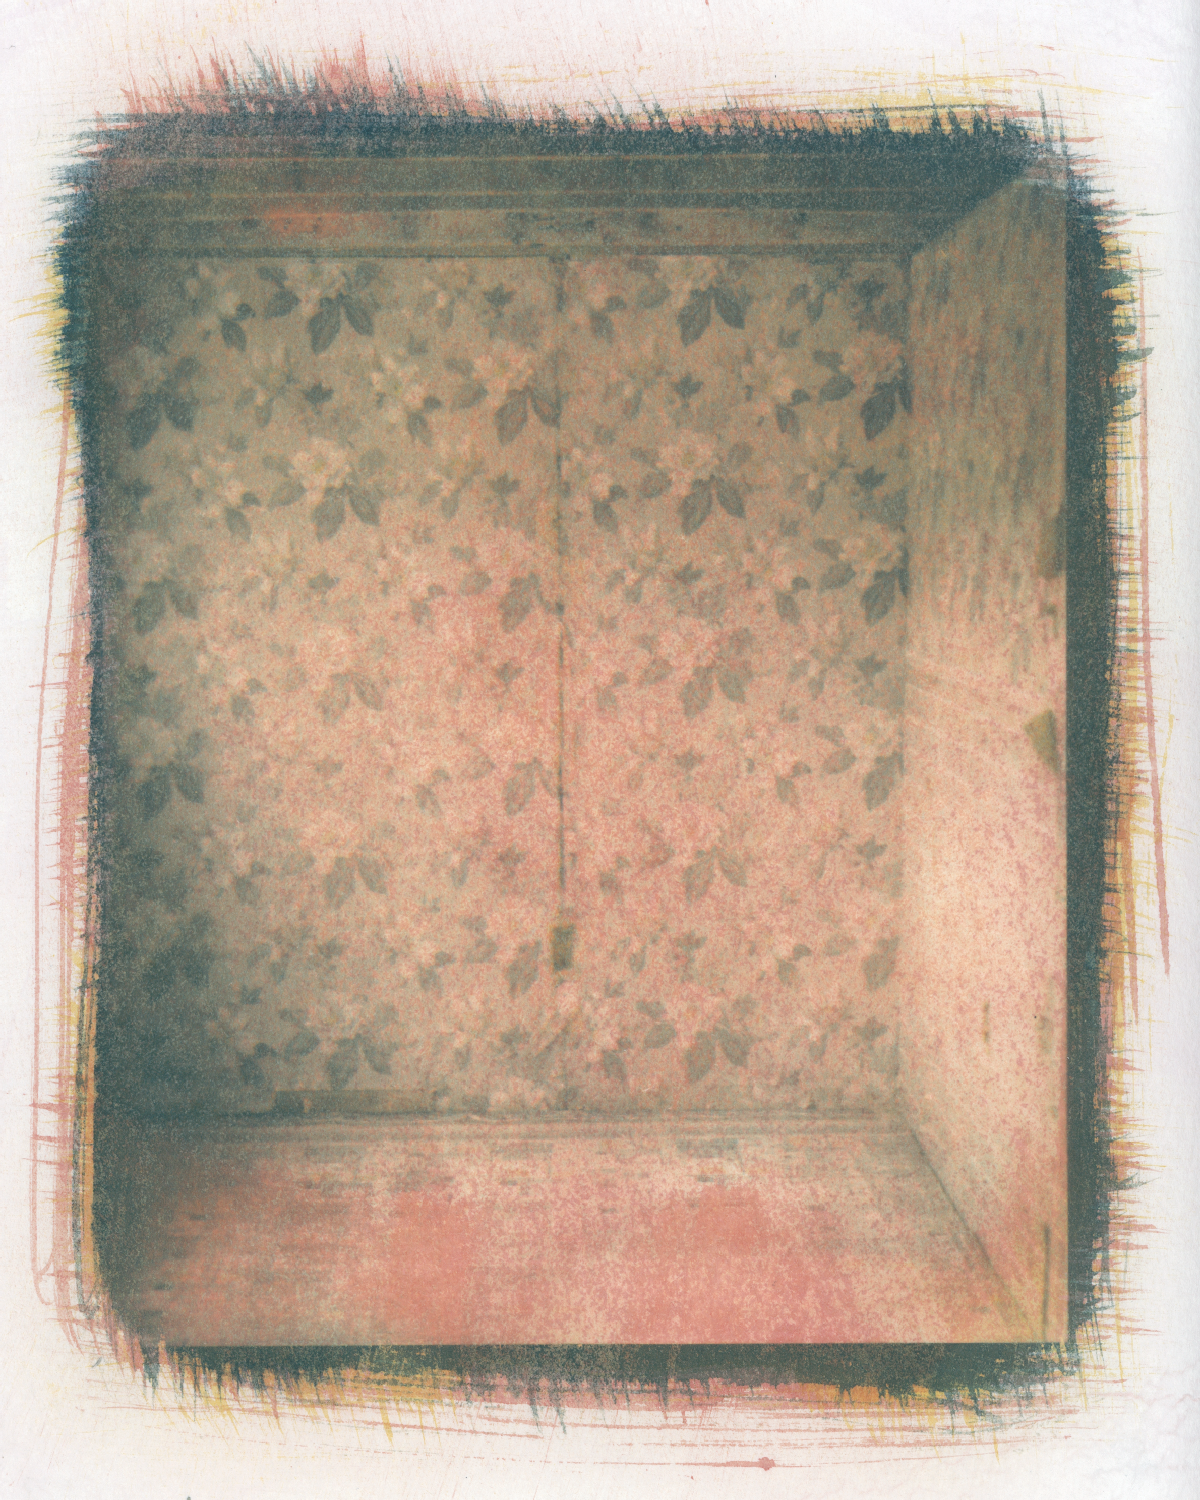 18/31 (1): gum bichromate on strathmore (strathmore is not suitable for gum)